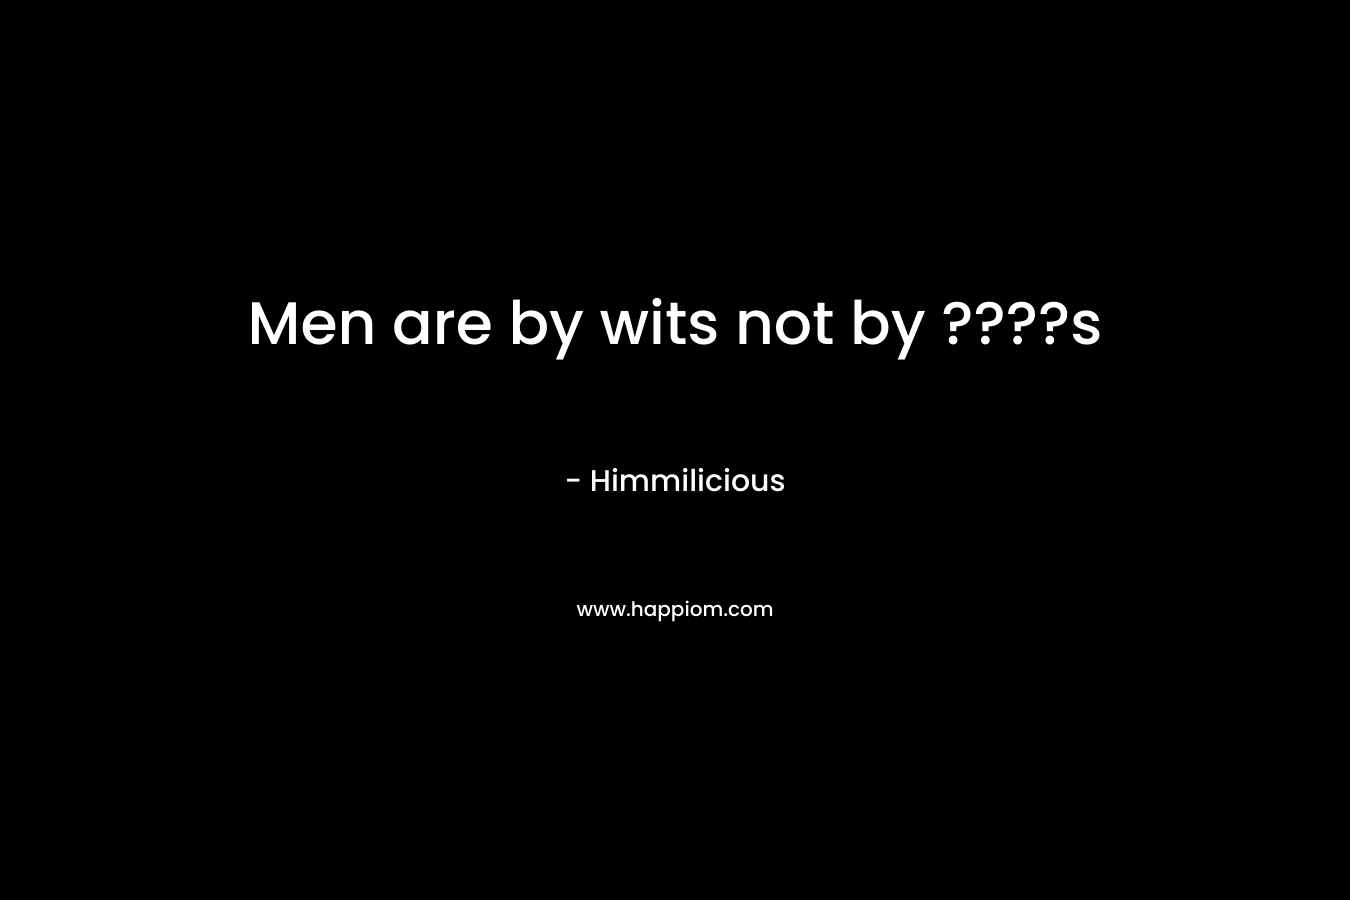 Men are by wits not by ????s